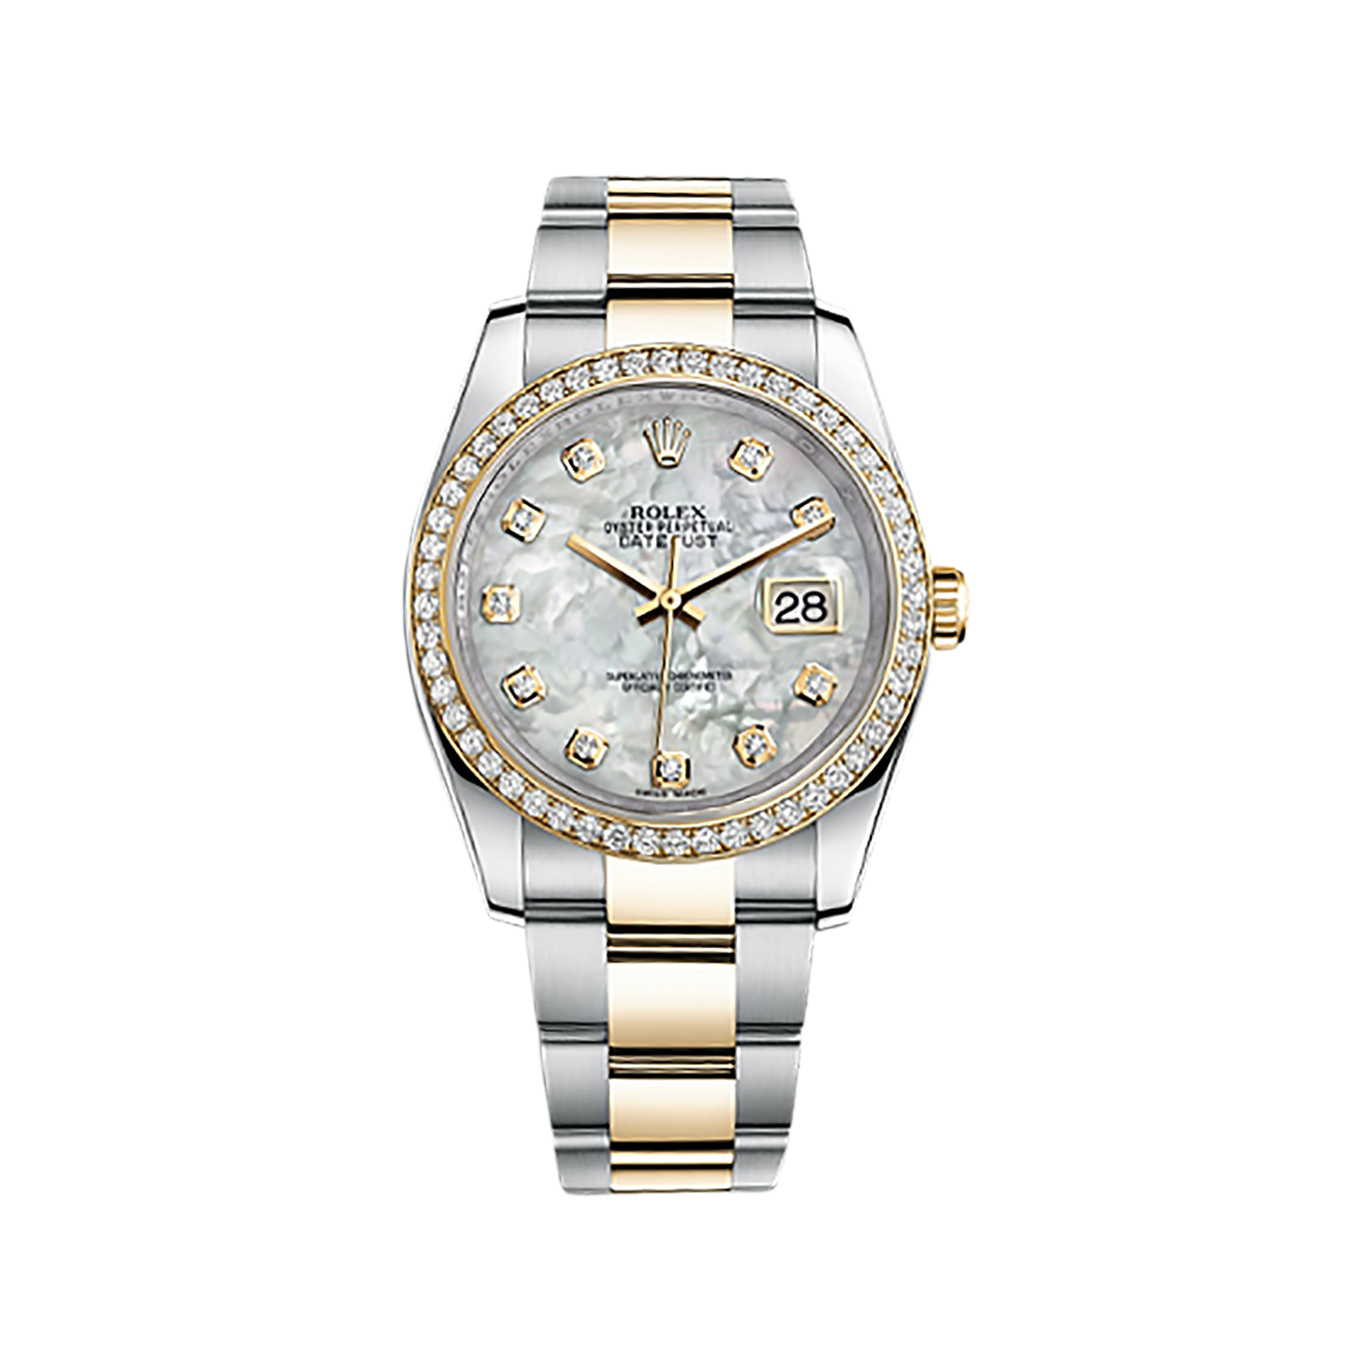 Datejust 36 116243 Gold & Stainless Steel Watch (White Mother-of-Pearl Set with Diamonds)